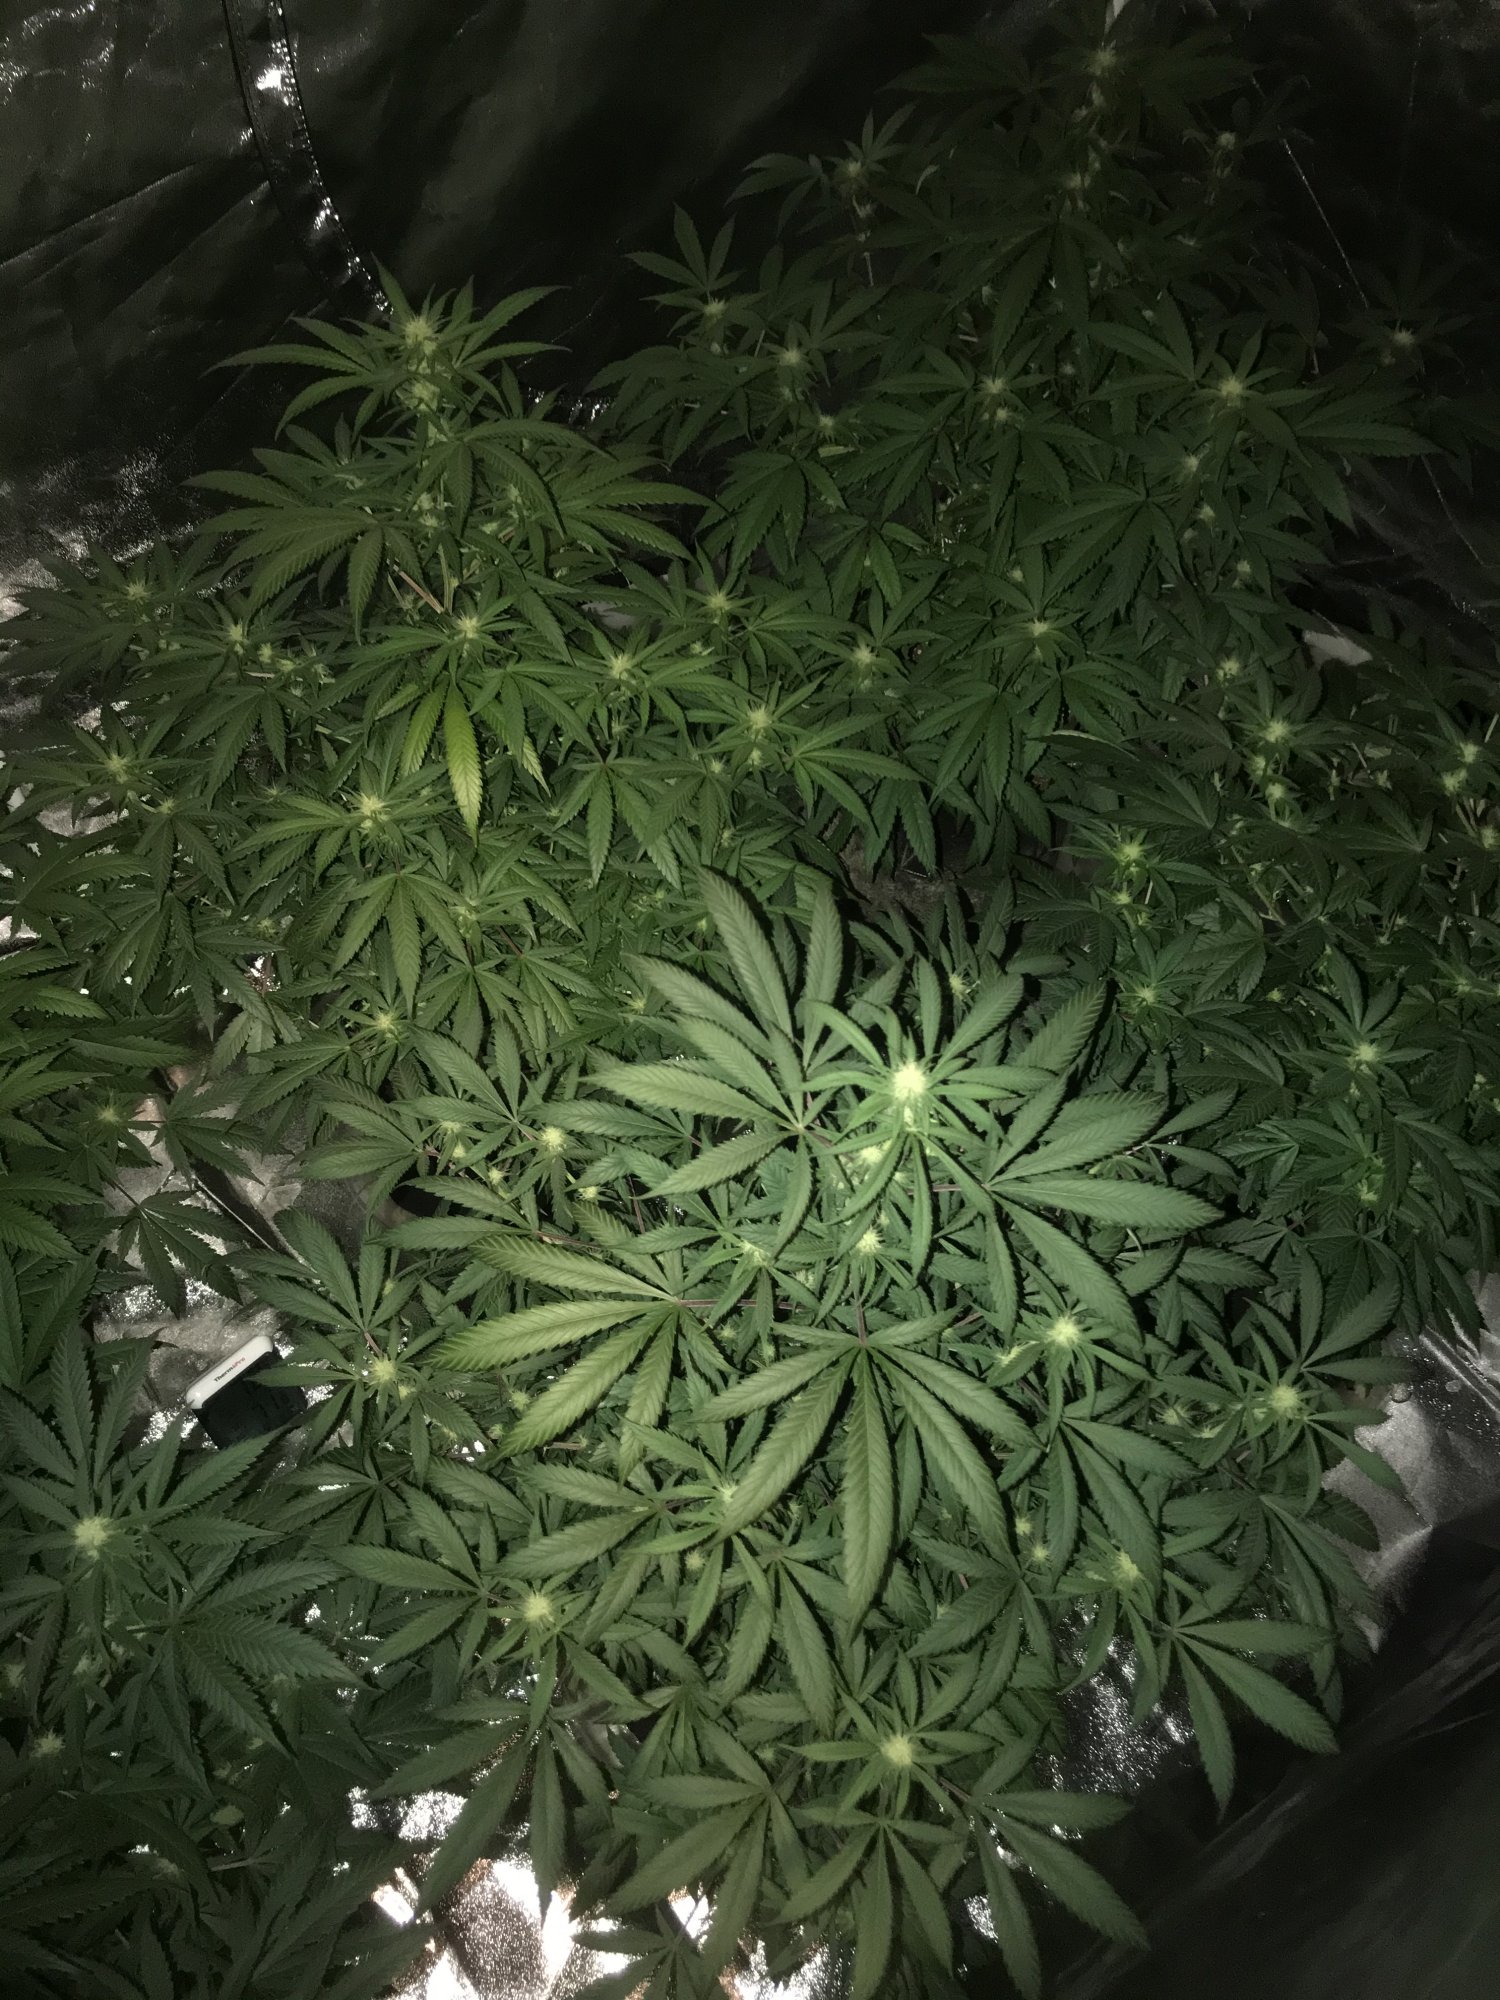 Slight yellowing of fan leaves during flower 5